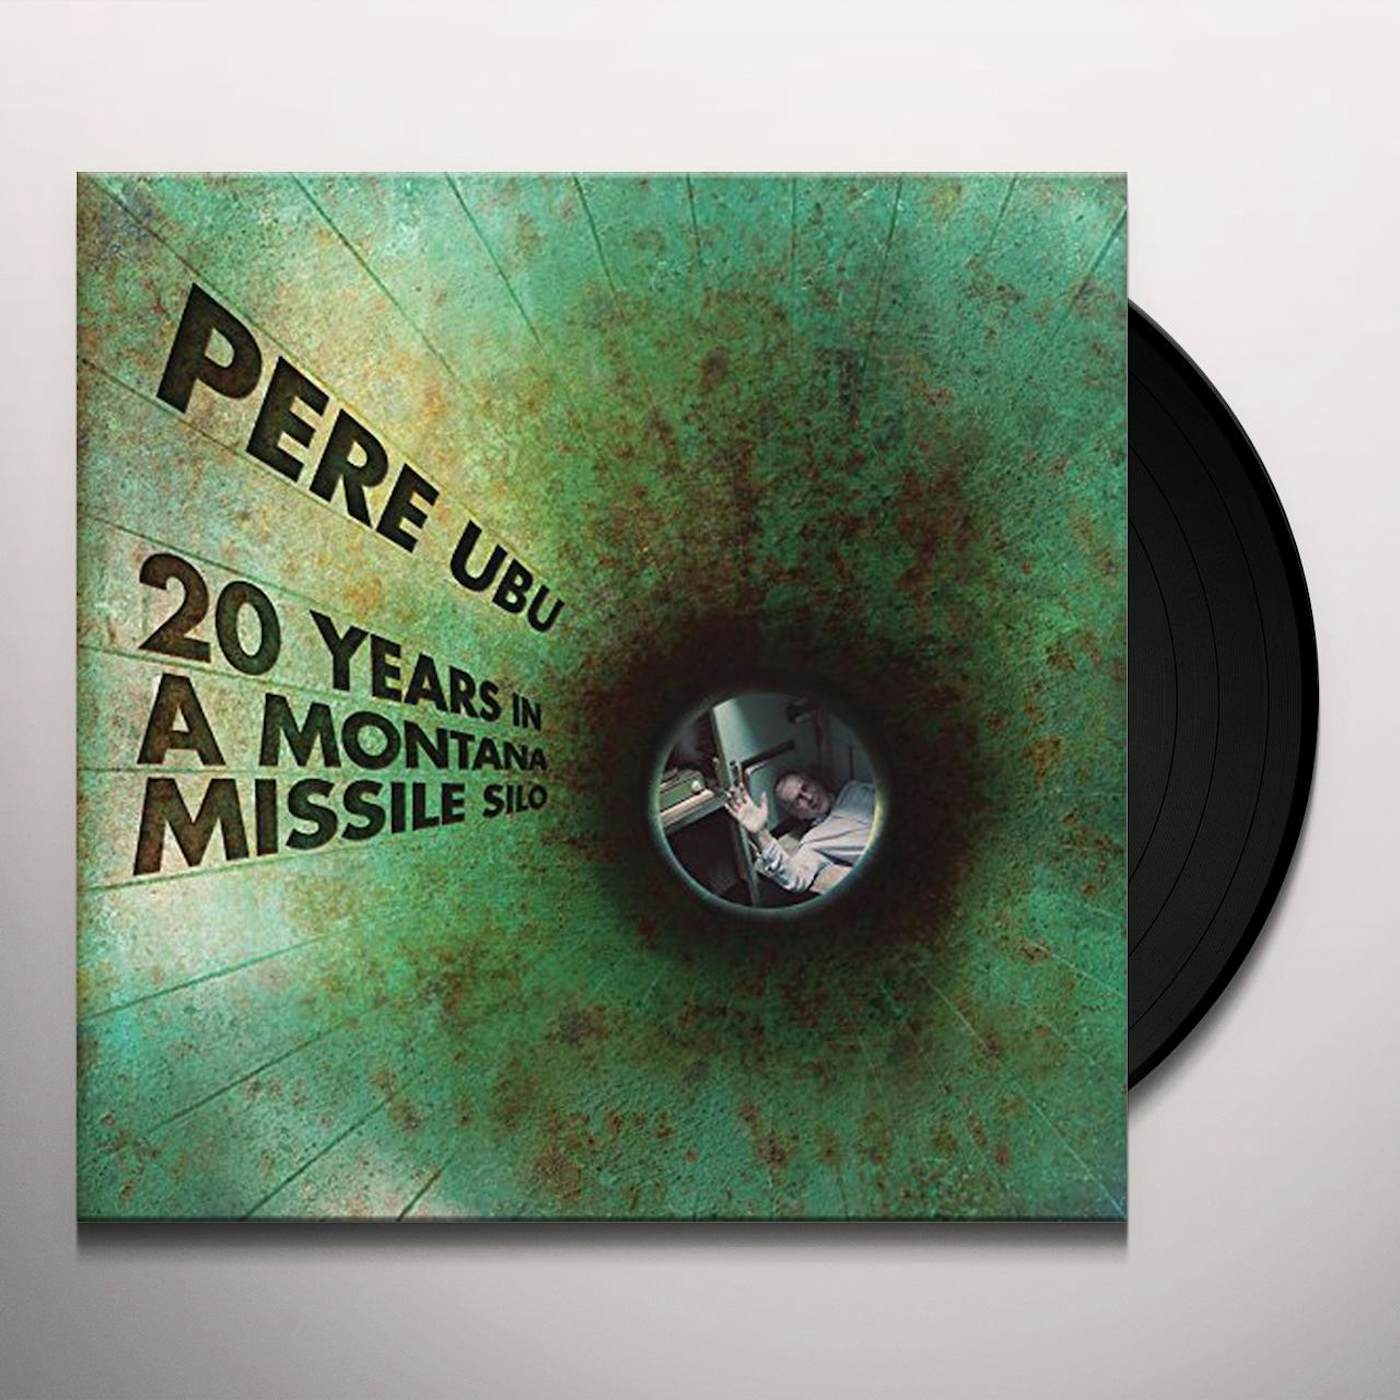 Pere Ubu 20 Years in a Montana Missile Silo Vinyl Record